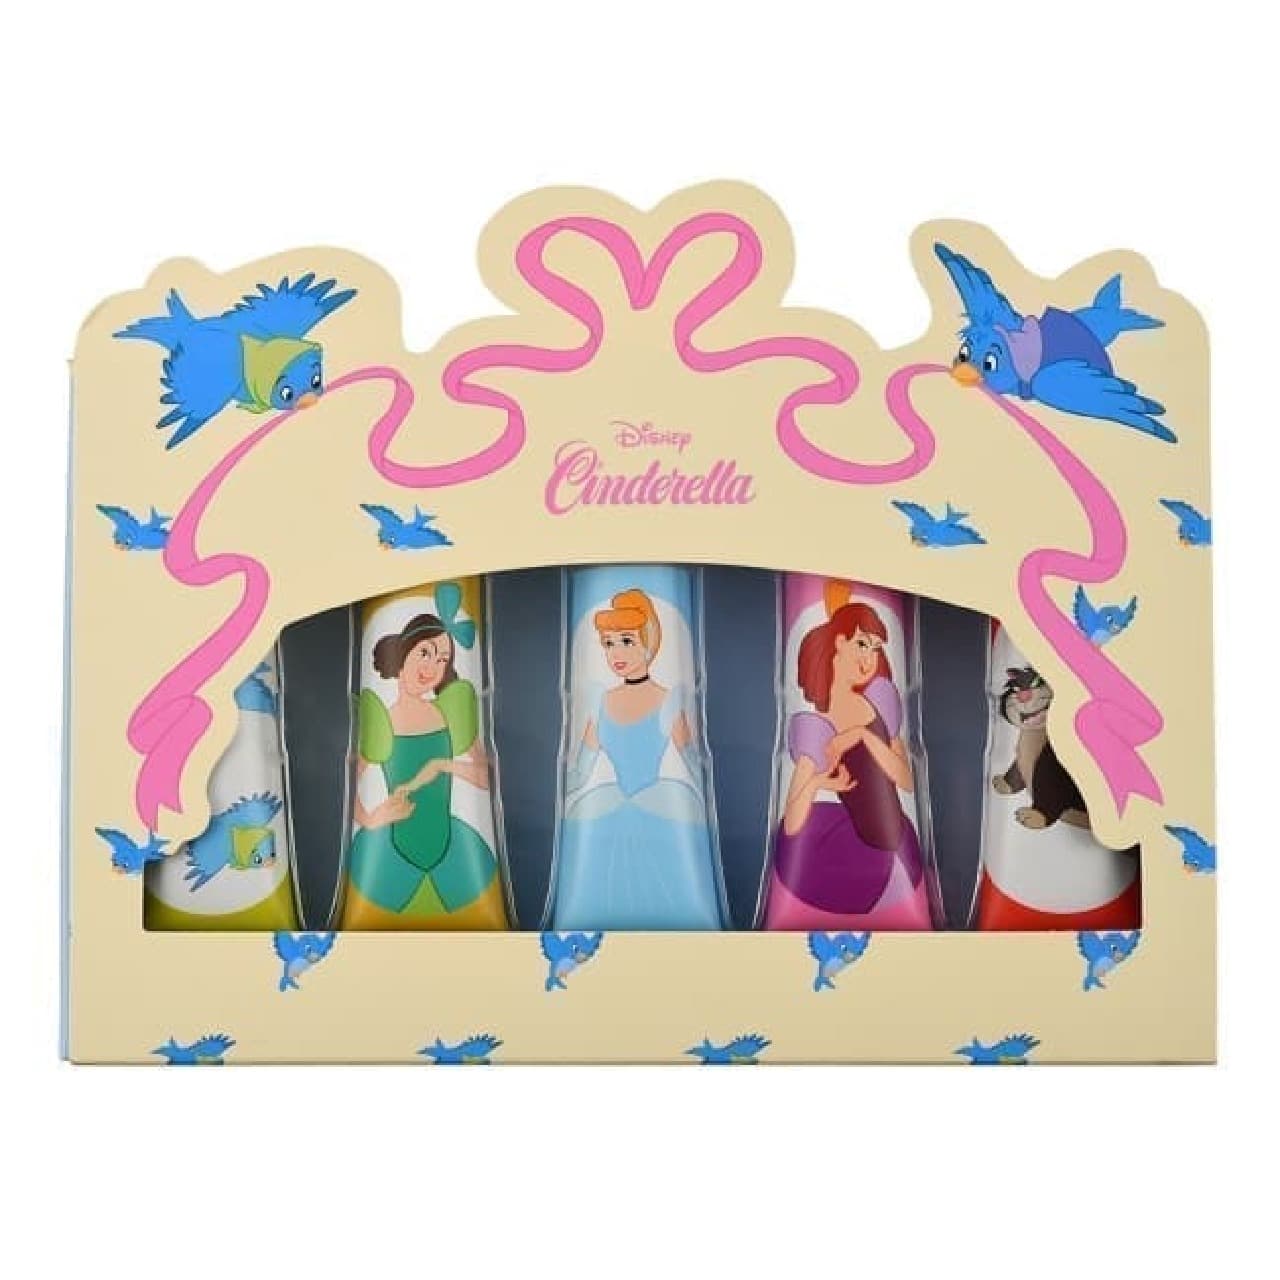 Cinderella 70th Anniversary Goods at Disney Store-"Glass Shoes" Smartphone Stand